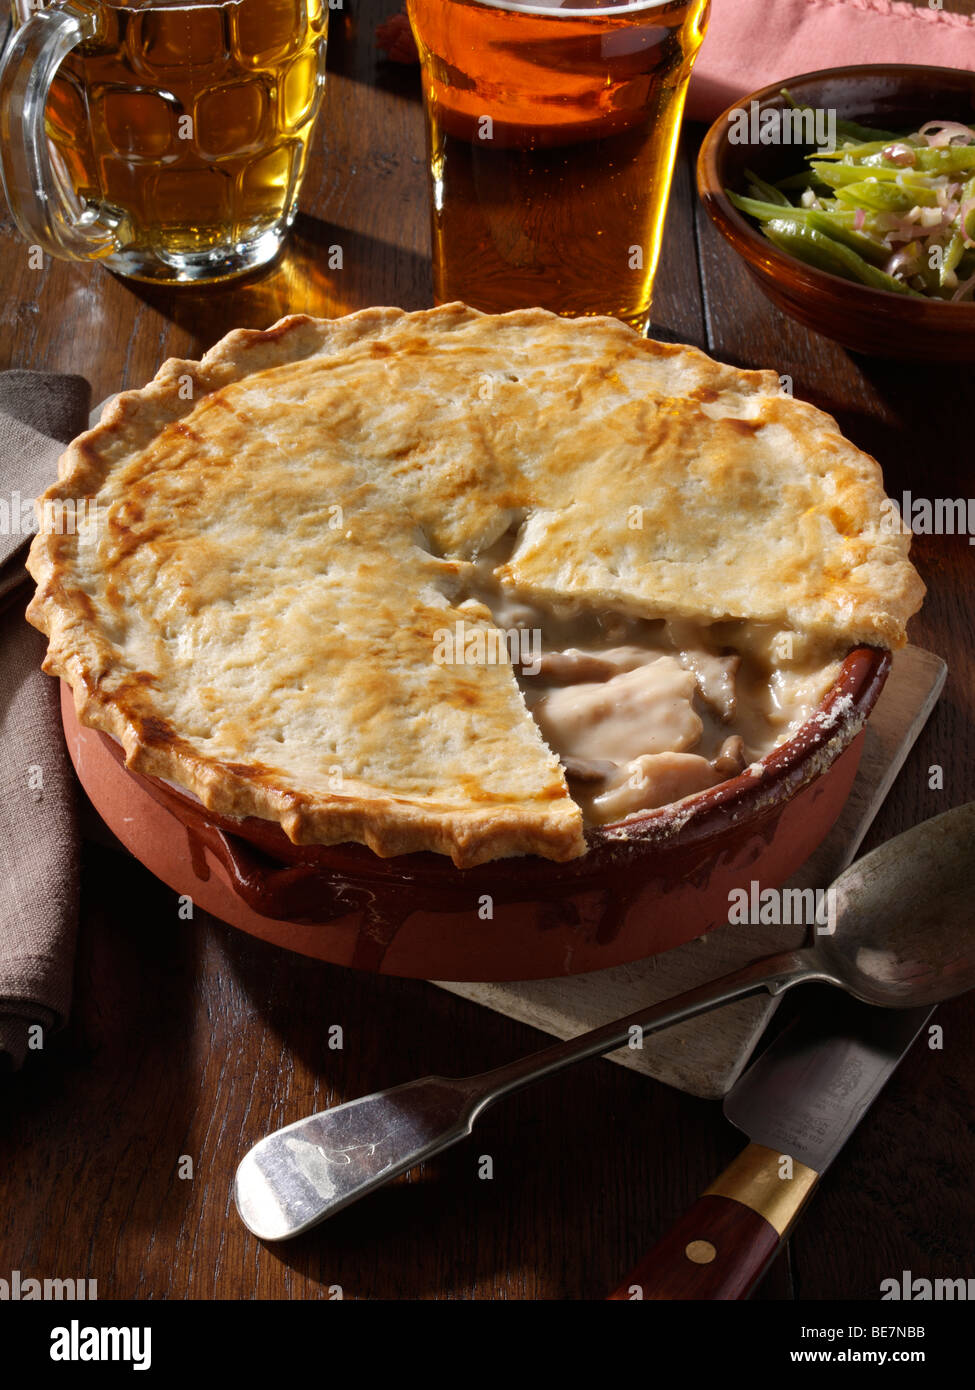 Whole family size chicken pie with runner beans and beer in a table setting Stock Photo